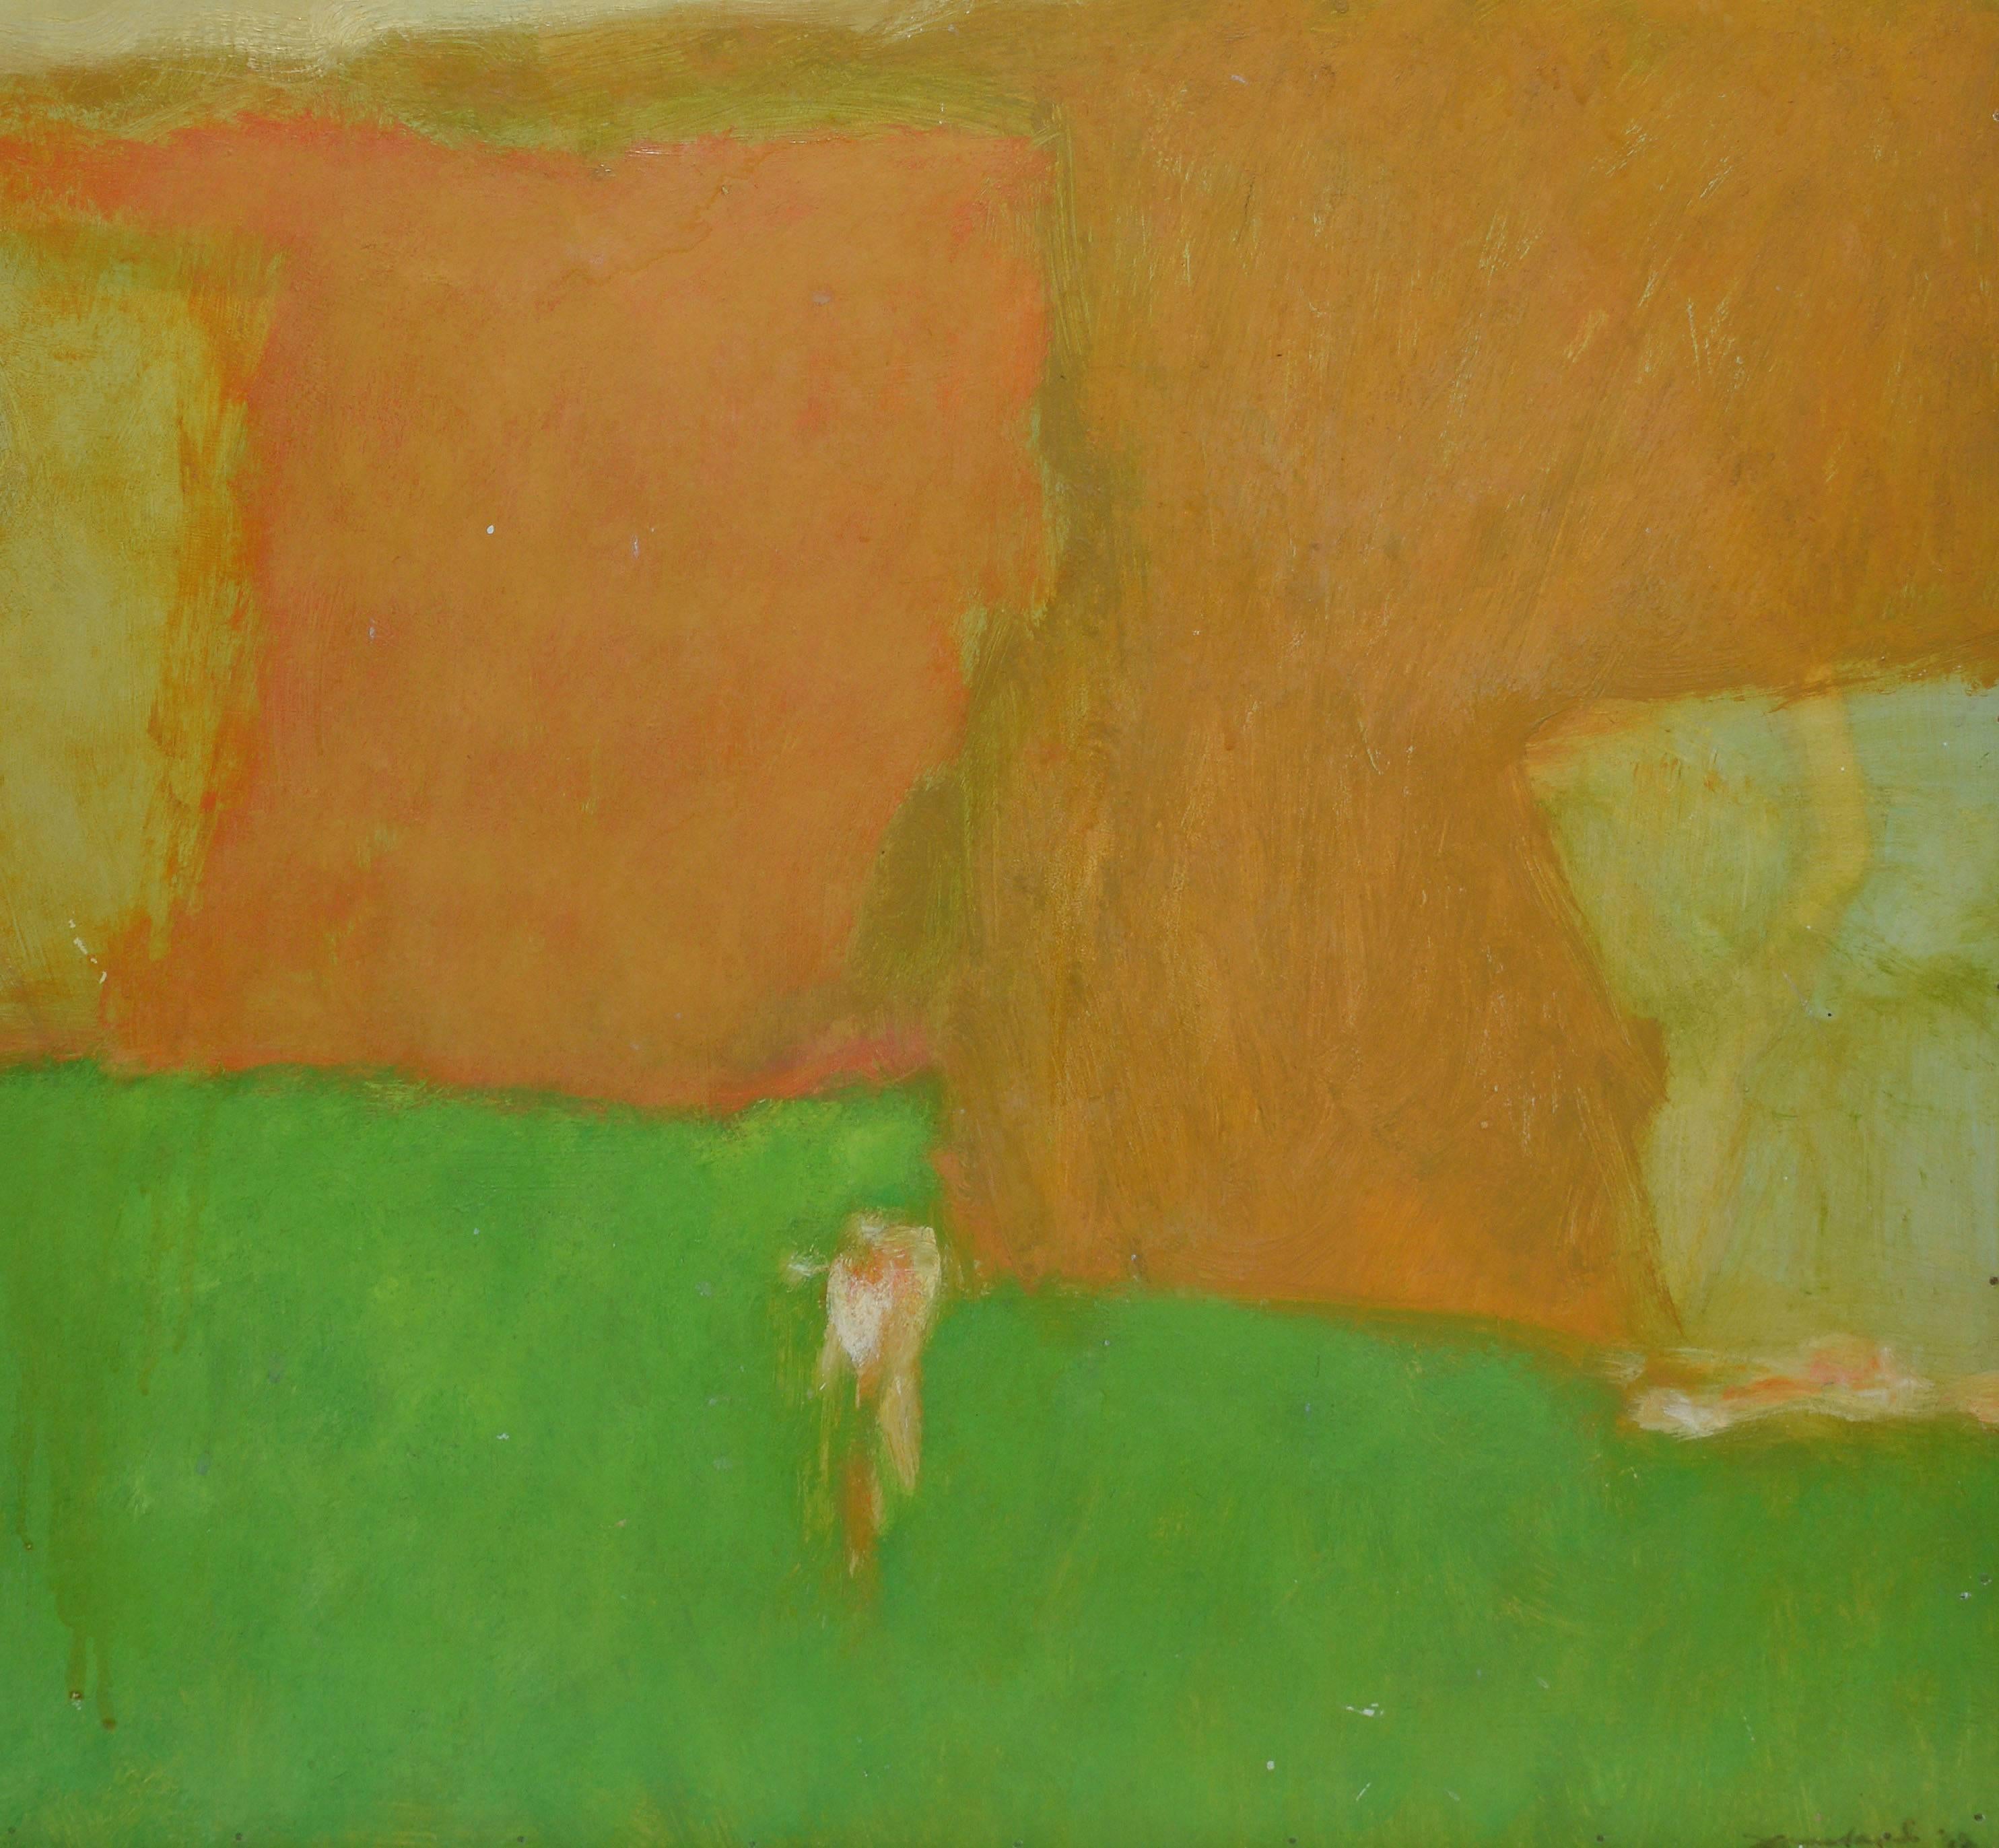 Abstract Landscape with a Figure - Brown Abstract Painting by Unknown